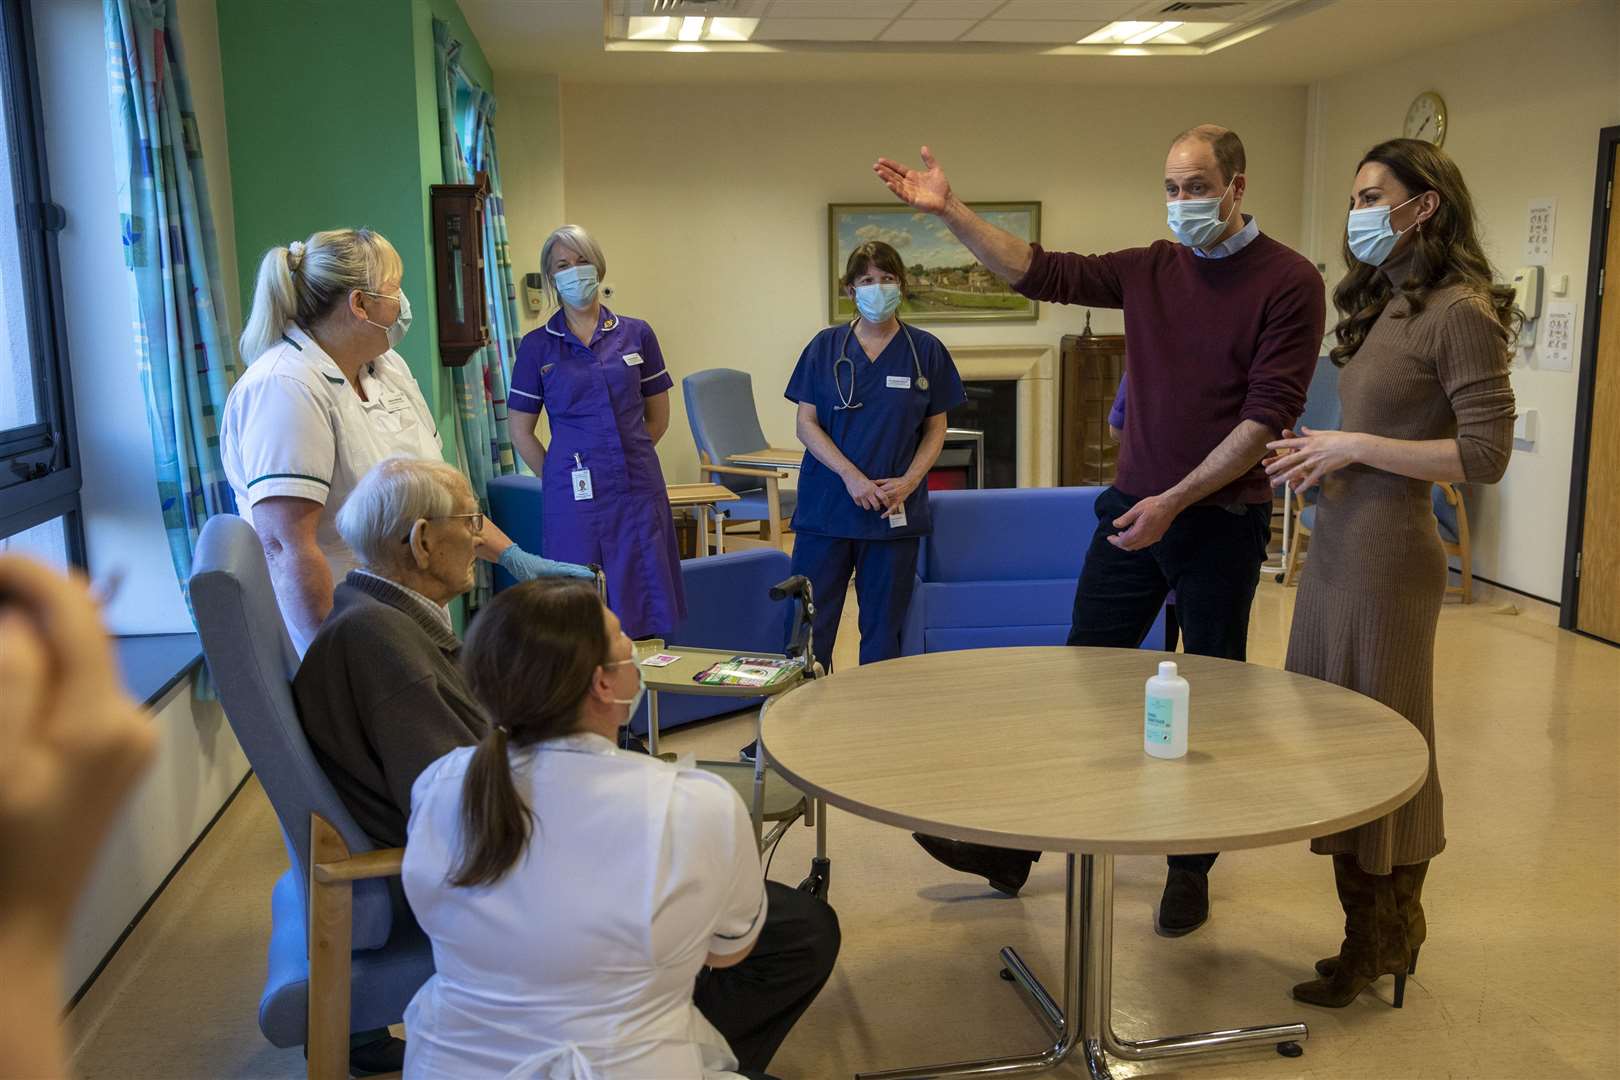 The royals spoke to staff and patients during their trip to east Lancashire (James Glossop/The Times/PA)